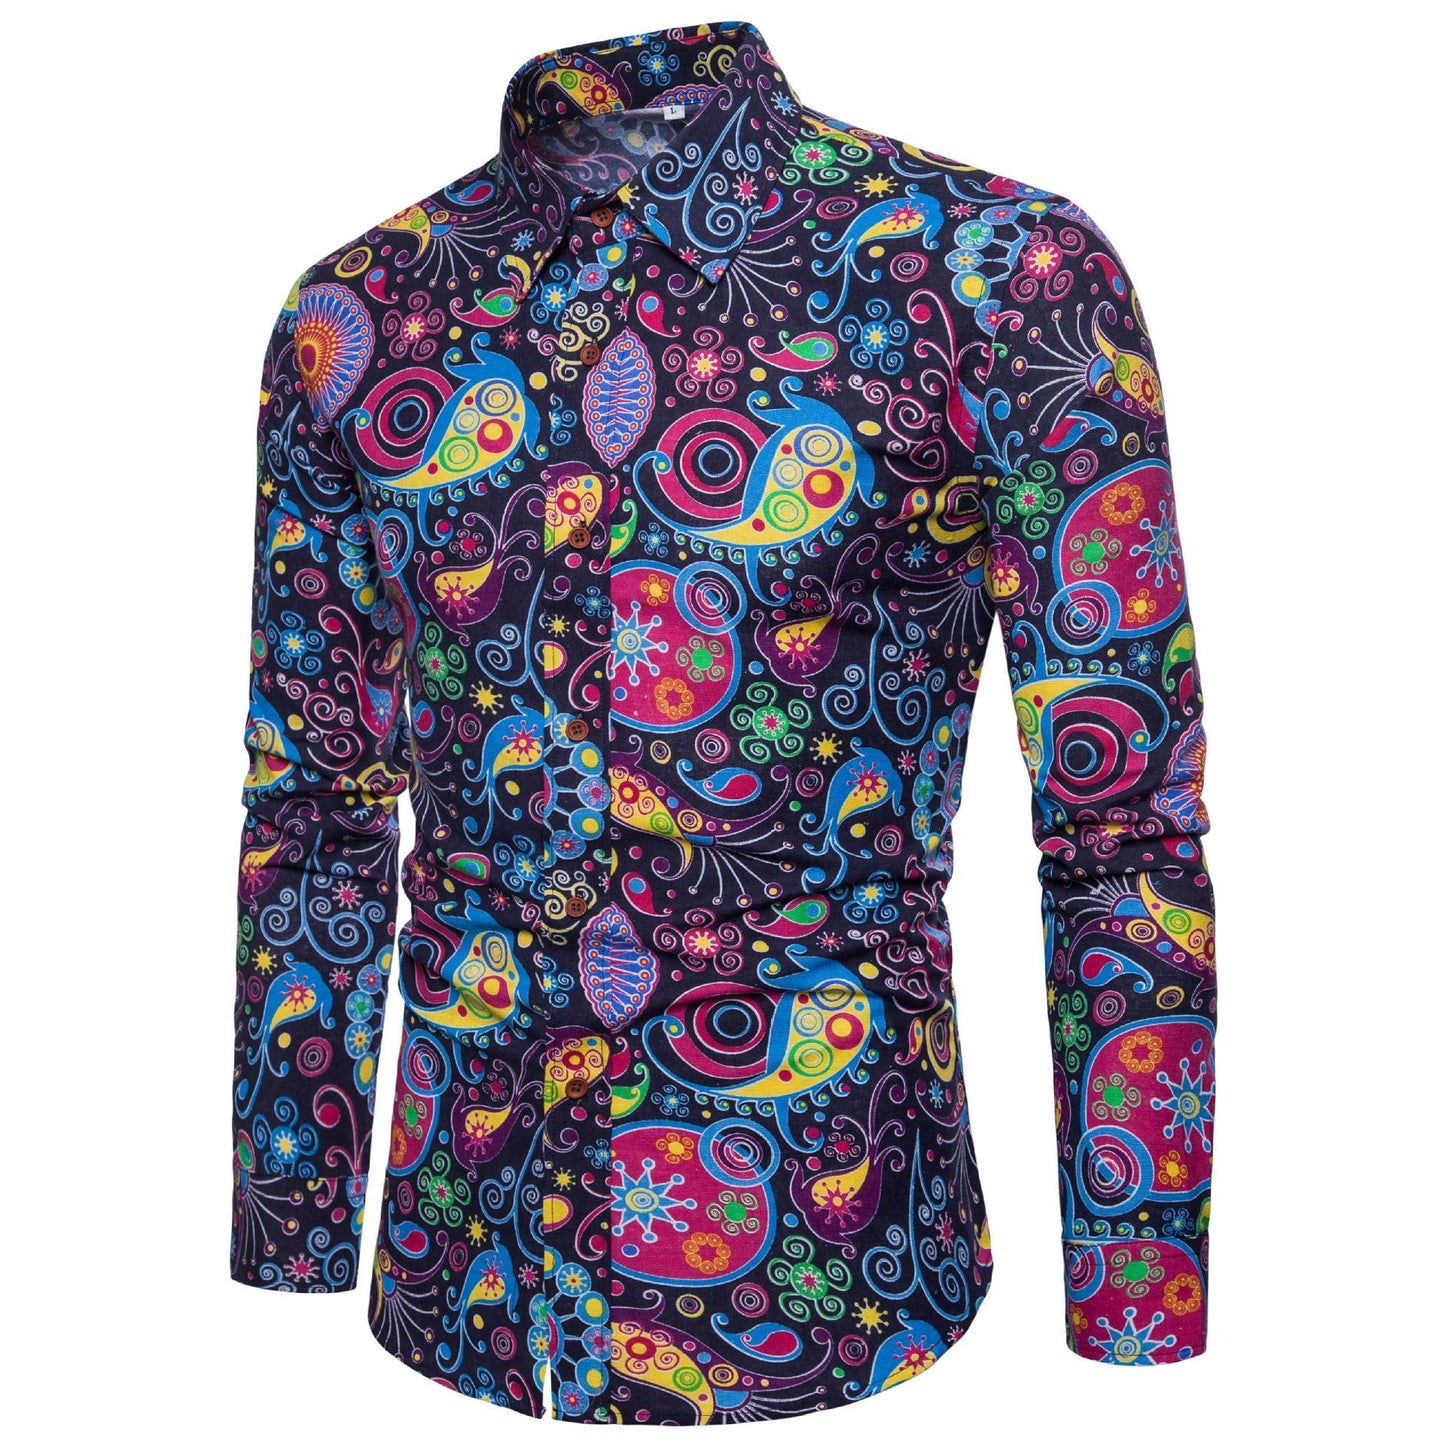 Casual Comfort, Bold Style: Men's Long Sleeve Shirt (Fashionable Prints). Stay comfortable and stand out with a variety of eye-catching prints in our long-sleeve shirts